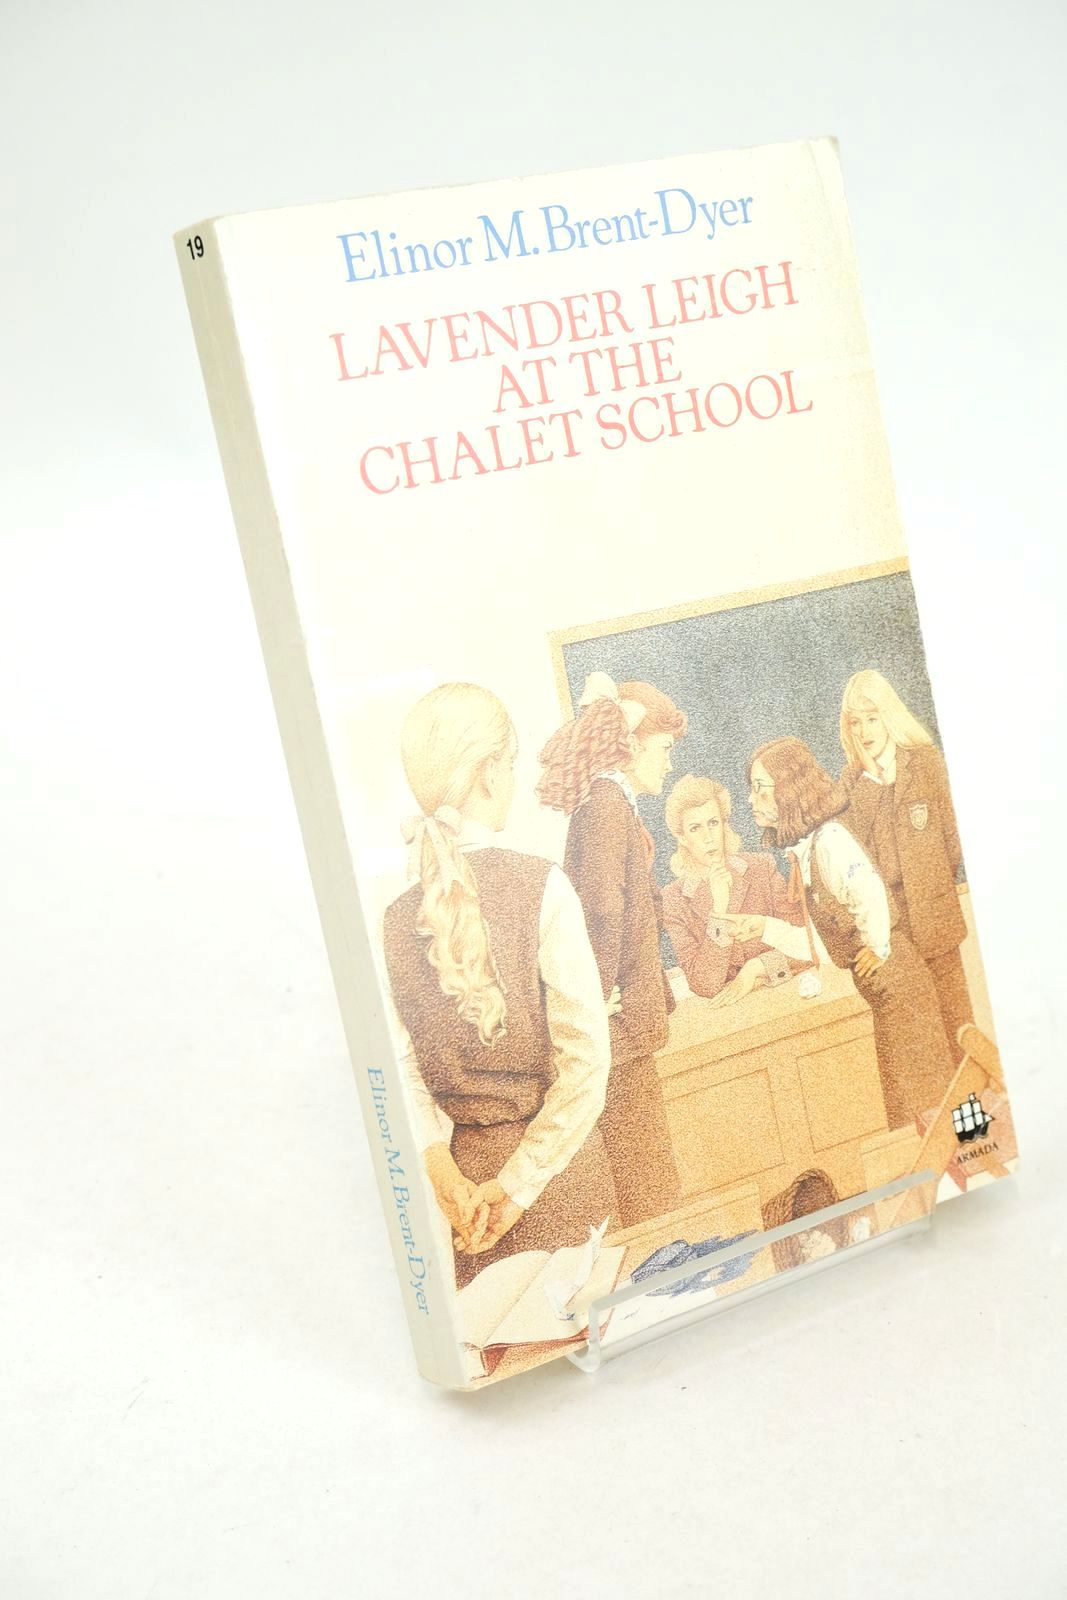 Photo of LAVENDER LEIGH AT THE CHALET SCHOOL written by Brent-Dyer, Elinor M. published by Armada (STOCK CODE: 1325802)  for sale by Stella & Rose's Books